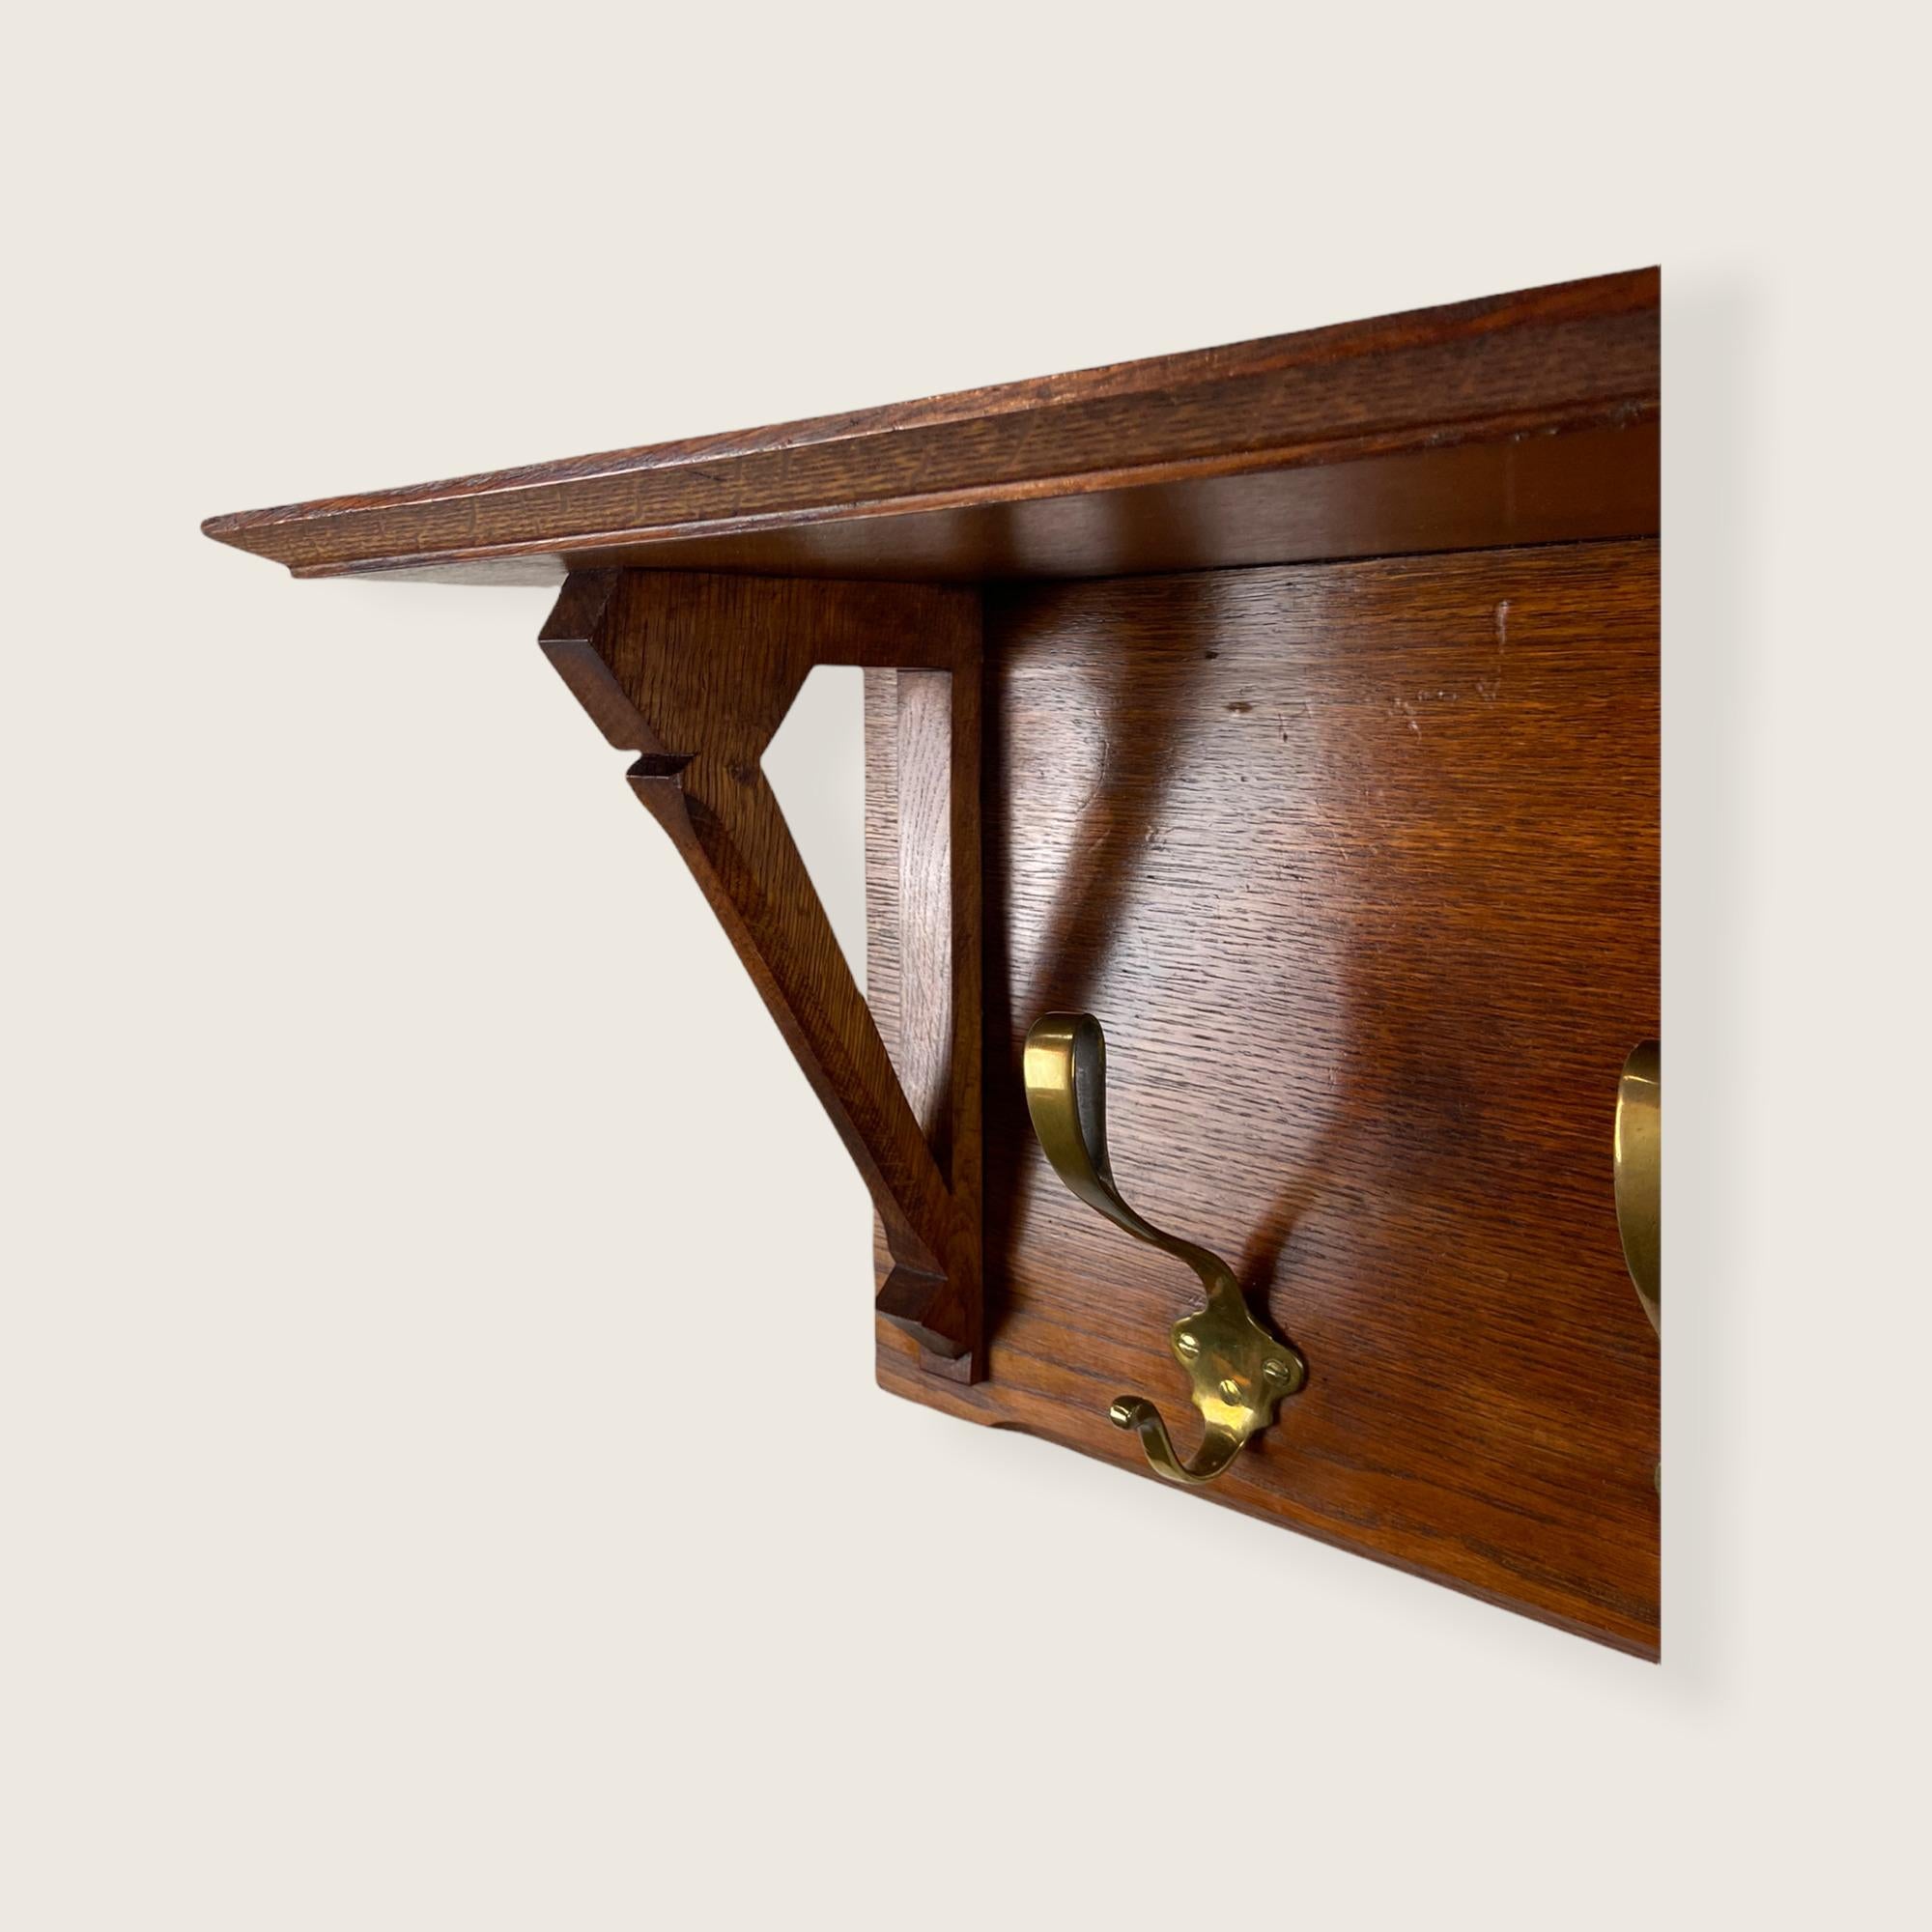 Early 20th Century Arts & Crafts Coat Rack For Sale